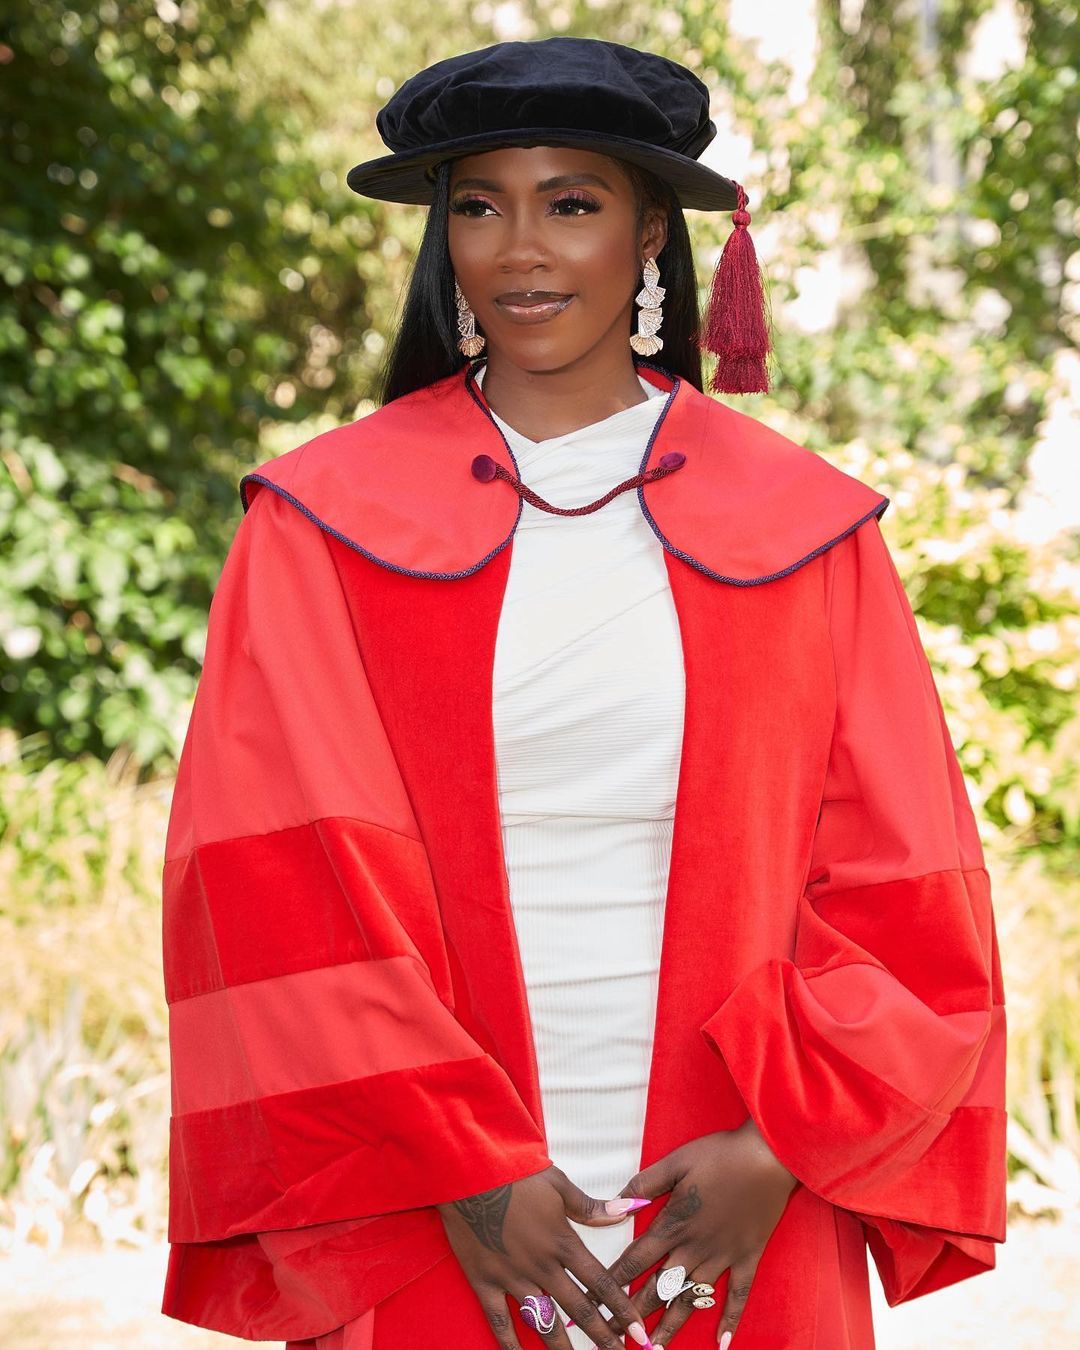 Tiwa Savage Bags Honorary Degree From The University Of Kent, UK (photos) 15762160_tiwasavagepost202207151821_jpegafff1588f571dd5097cbc87e638c2007